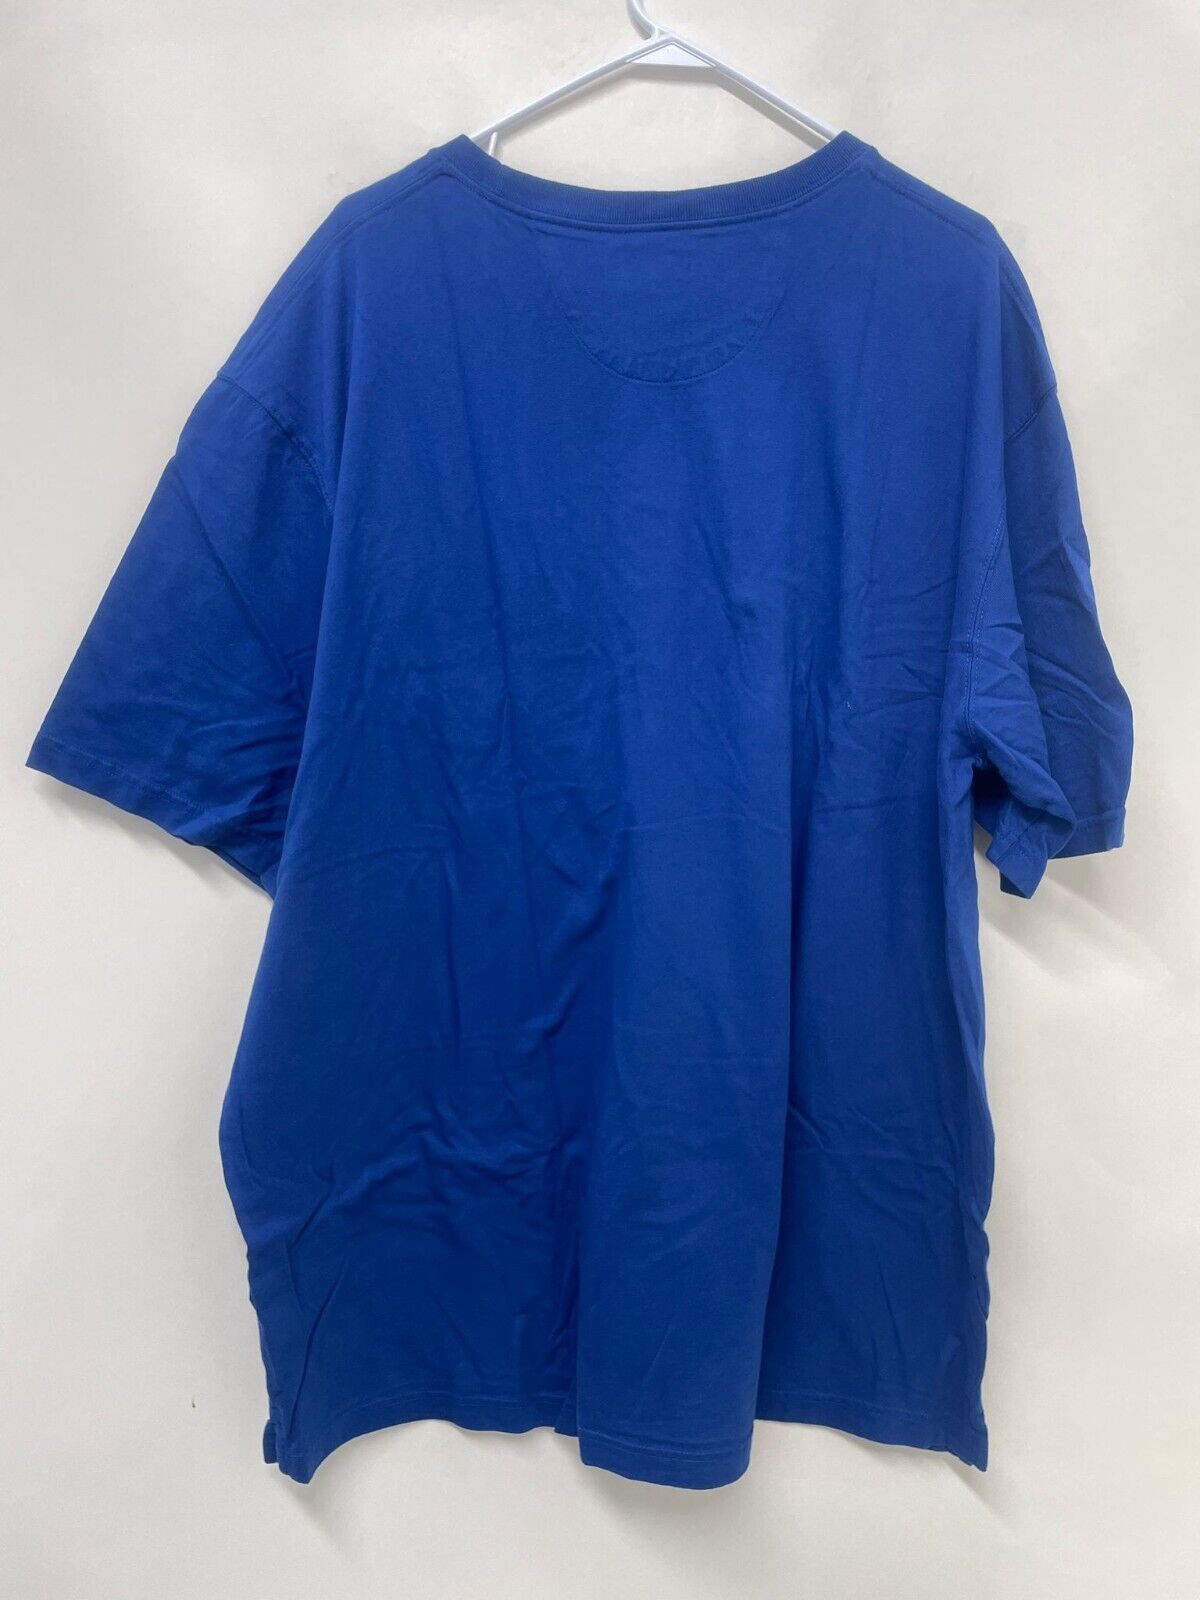 Duluth Trading Men XXL Longtail T Relaxed Fit SS Crew  Pocket T-Shirt Blue 95587